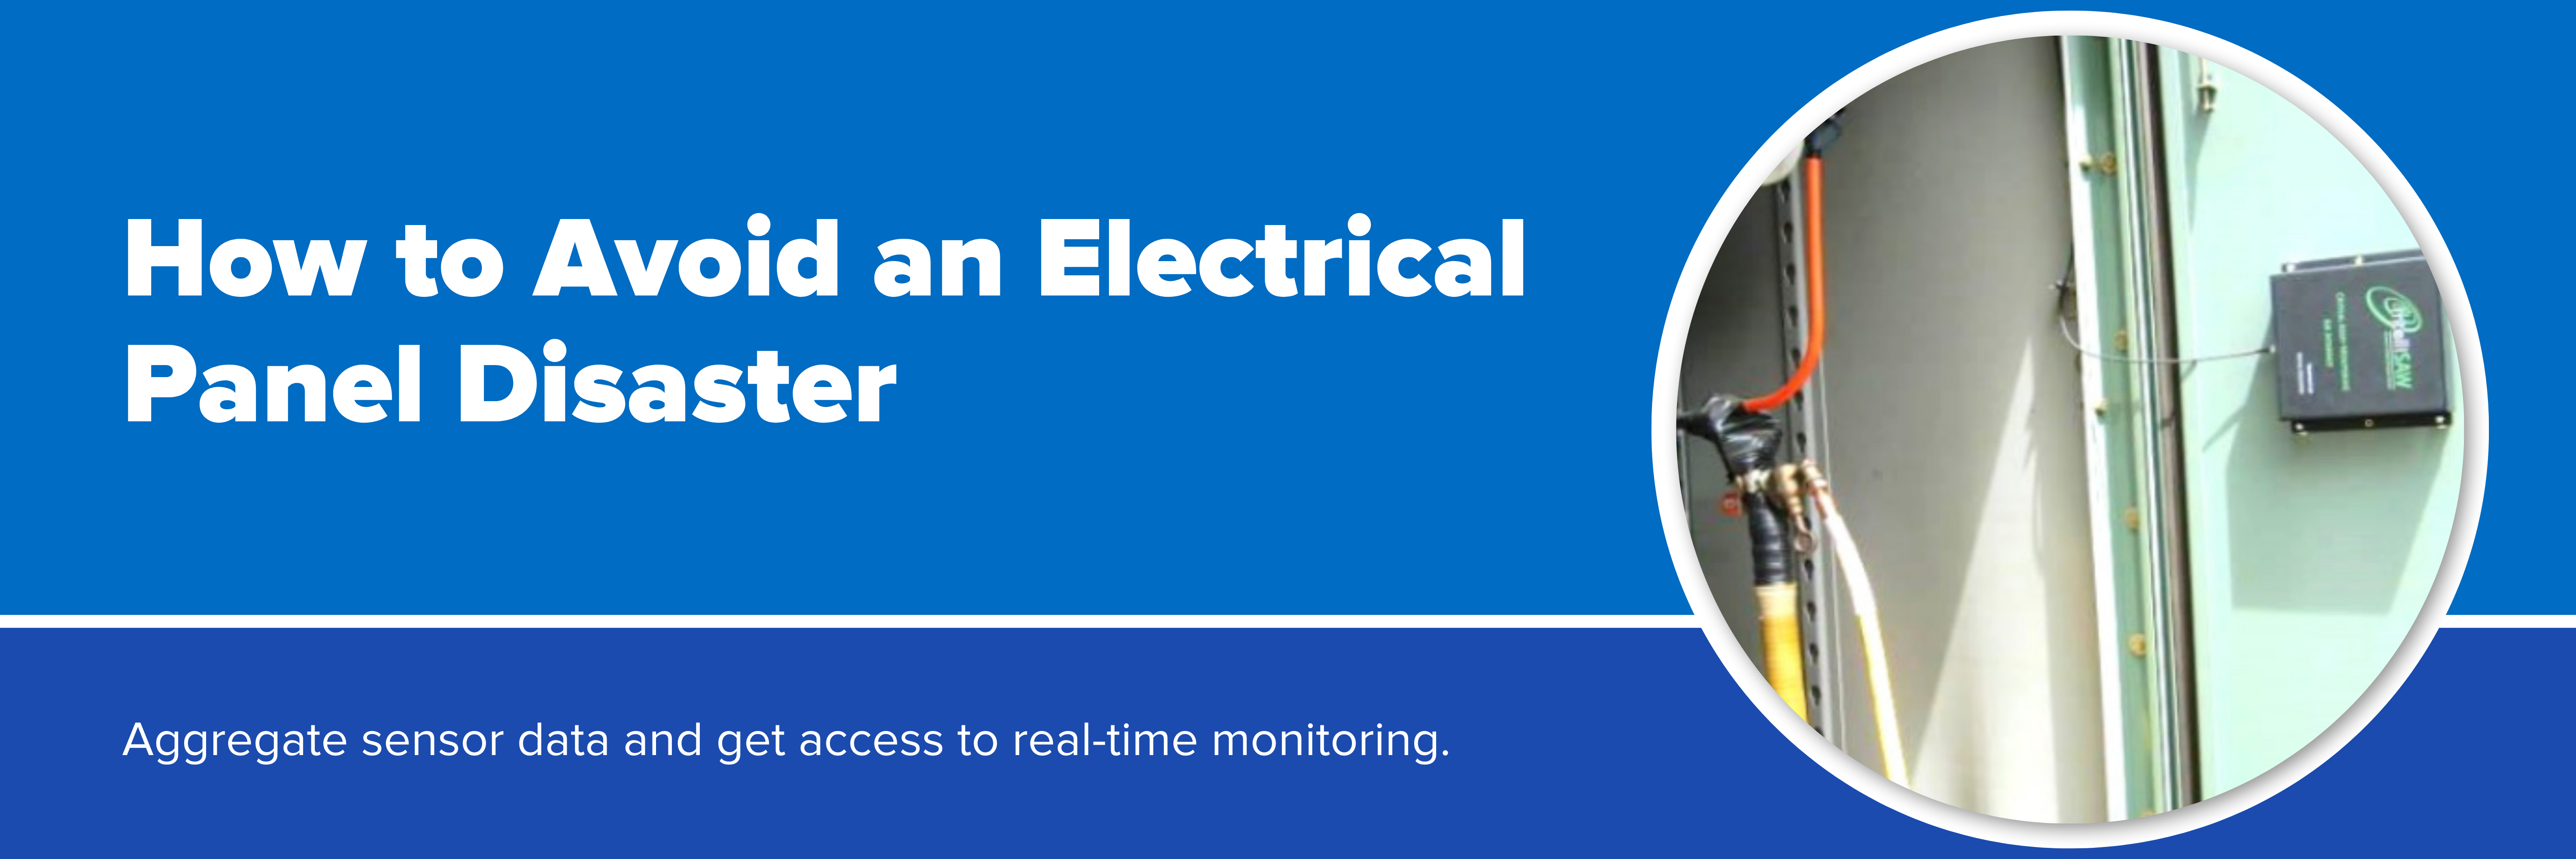 Header image with text "How to Avoid an Electrical Panel Disaster"